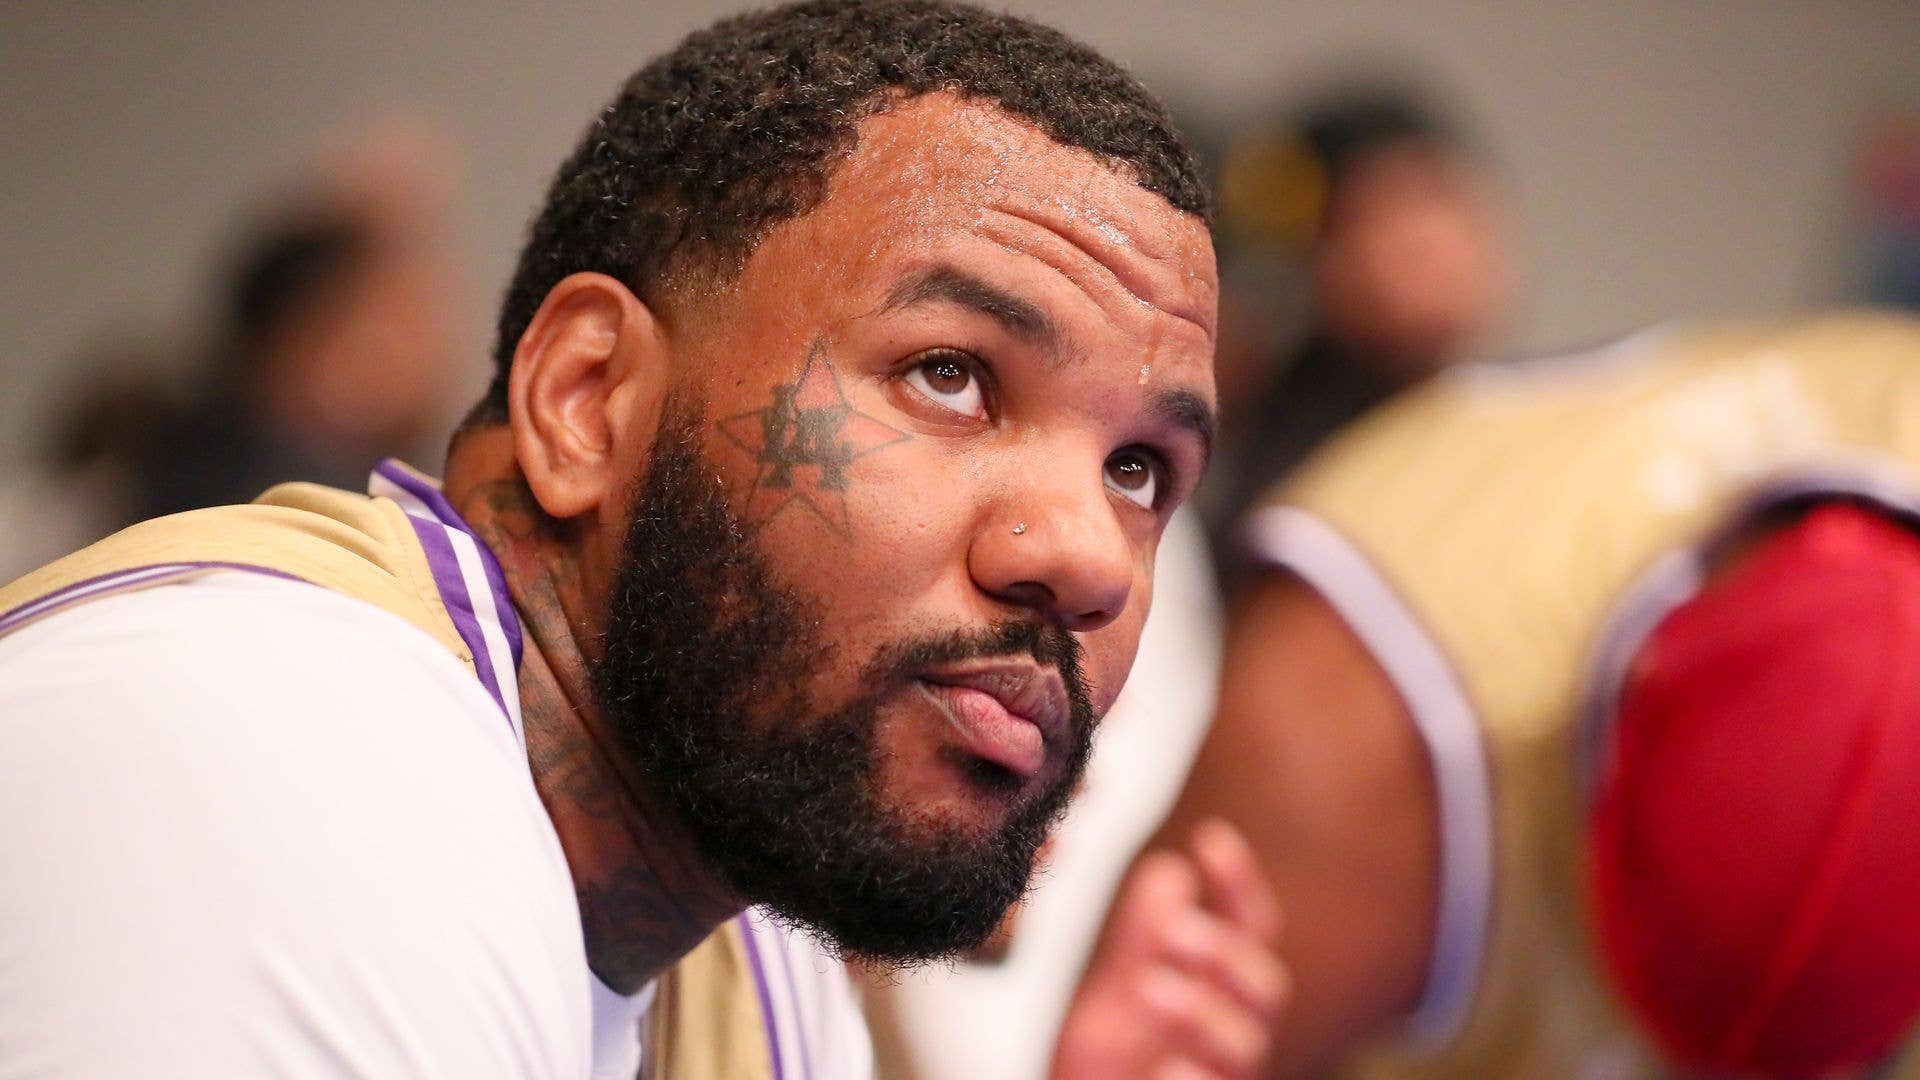 The Game at a celebrity basketball match-up